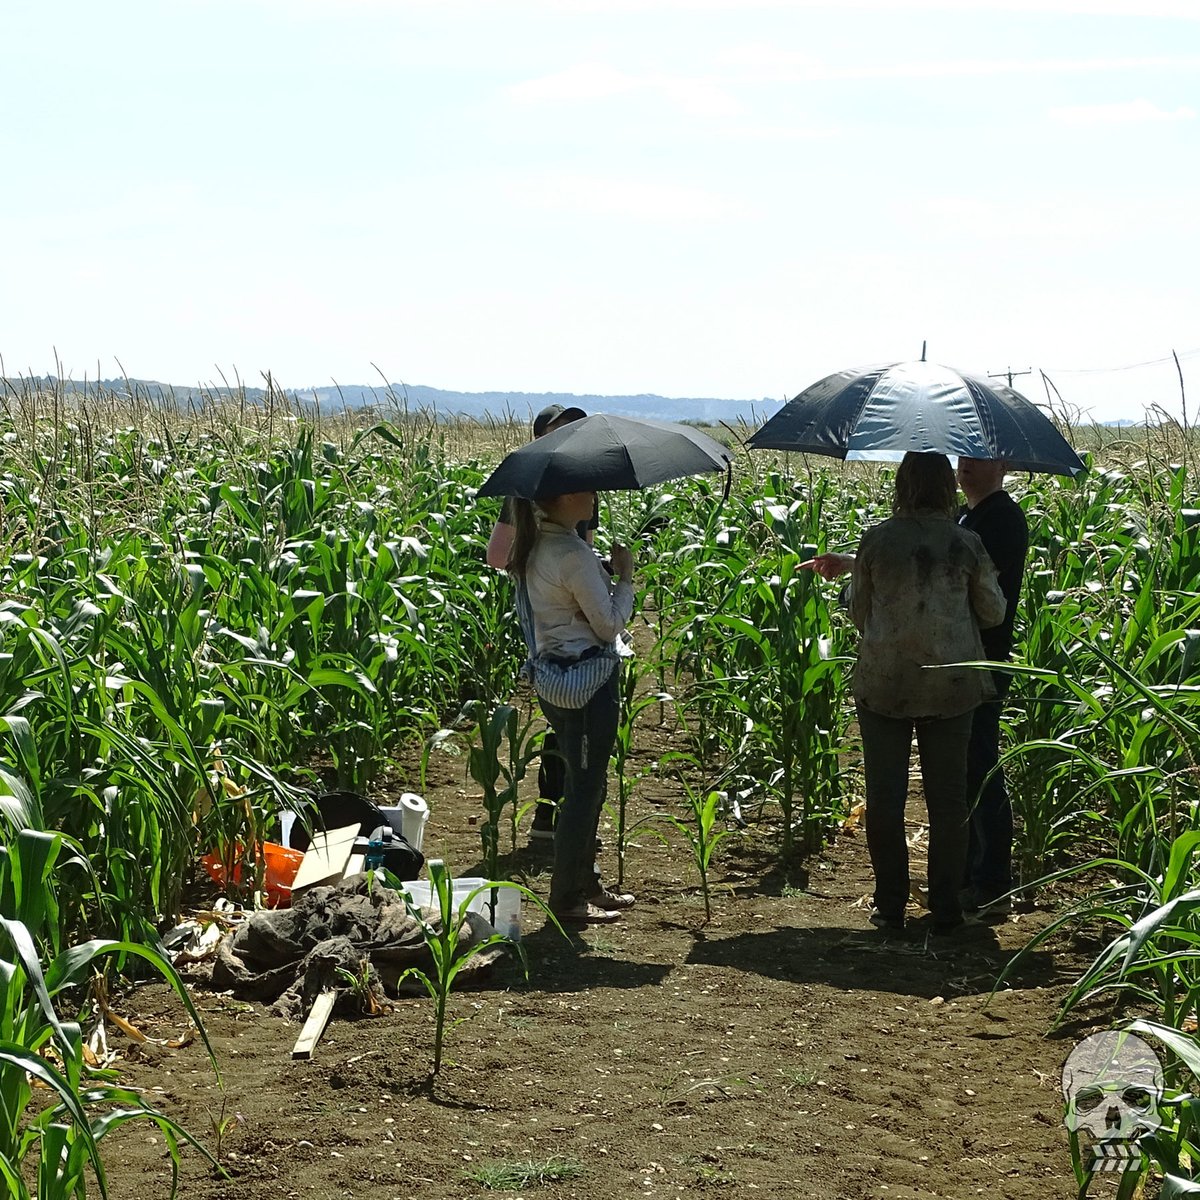 We've been SO lucky with each of our locations. Here we are on our very first day of filming, in the middle of a maize field...it was HOT!

#horror #horrorshorts #filming #movie #movielocation #onlocation #independentmovie #horrormovie #zombie #zombiemovie